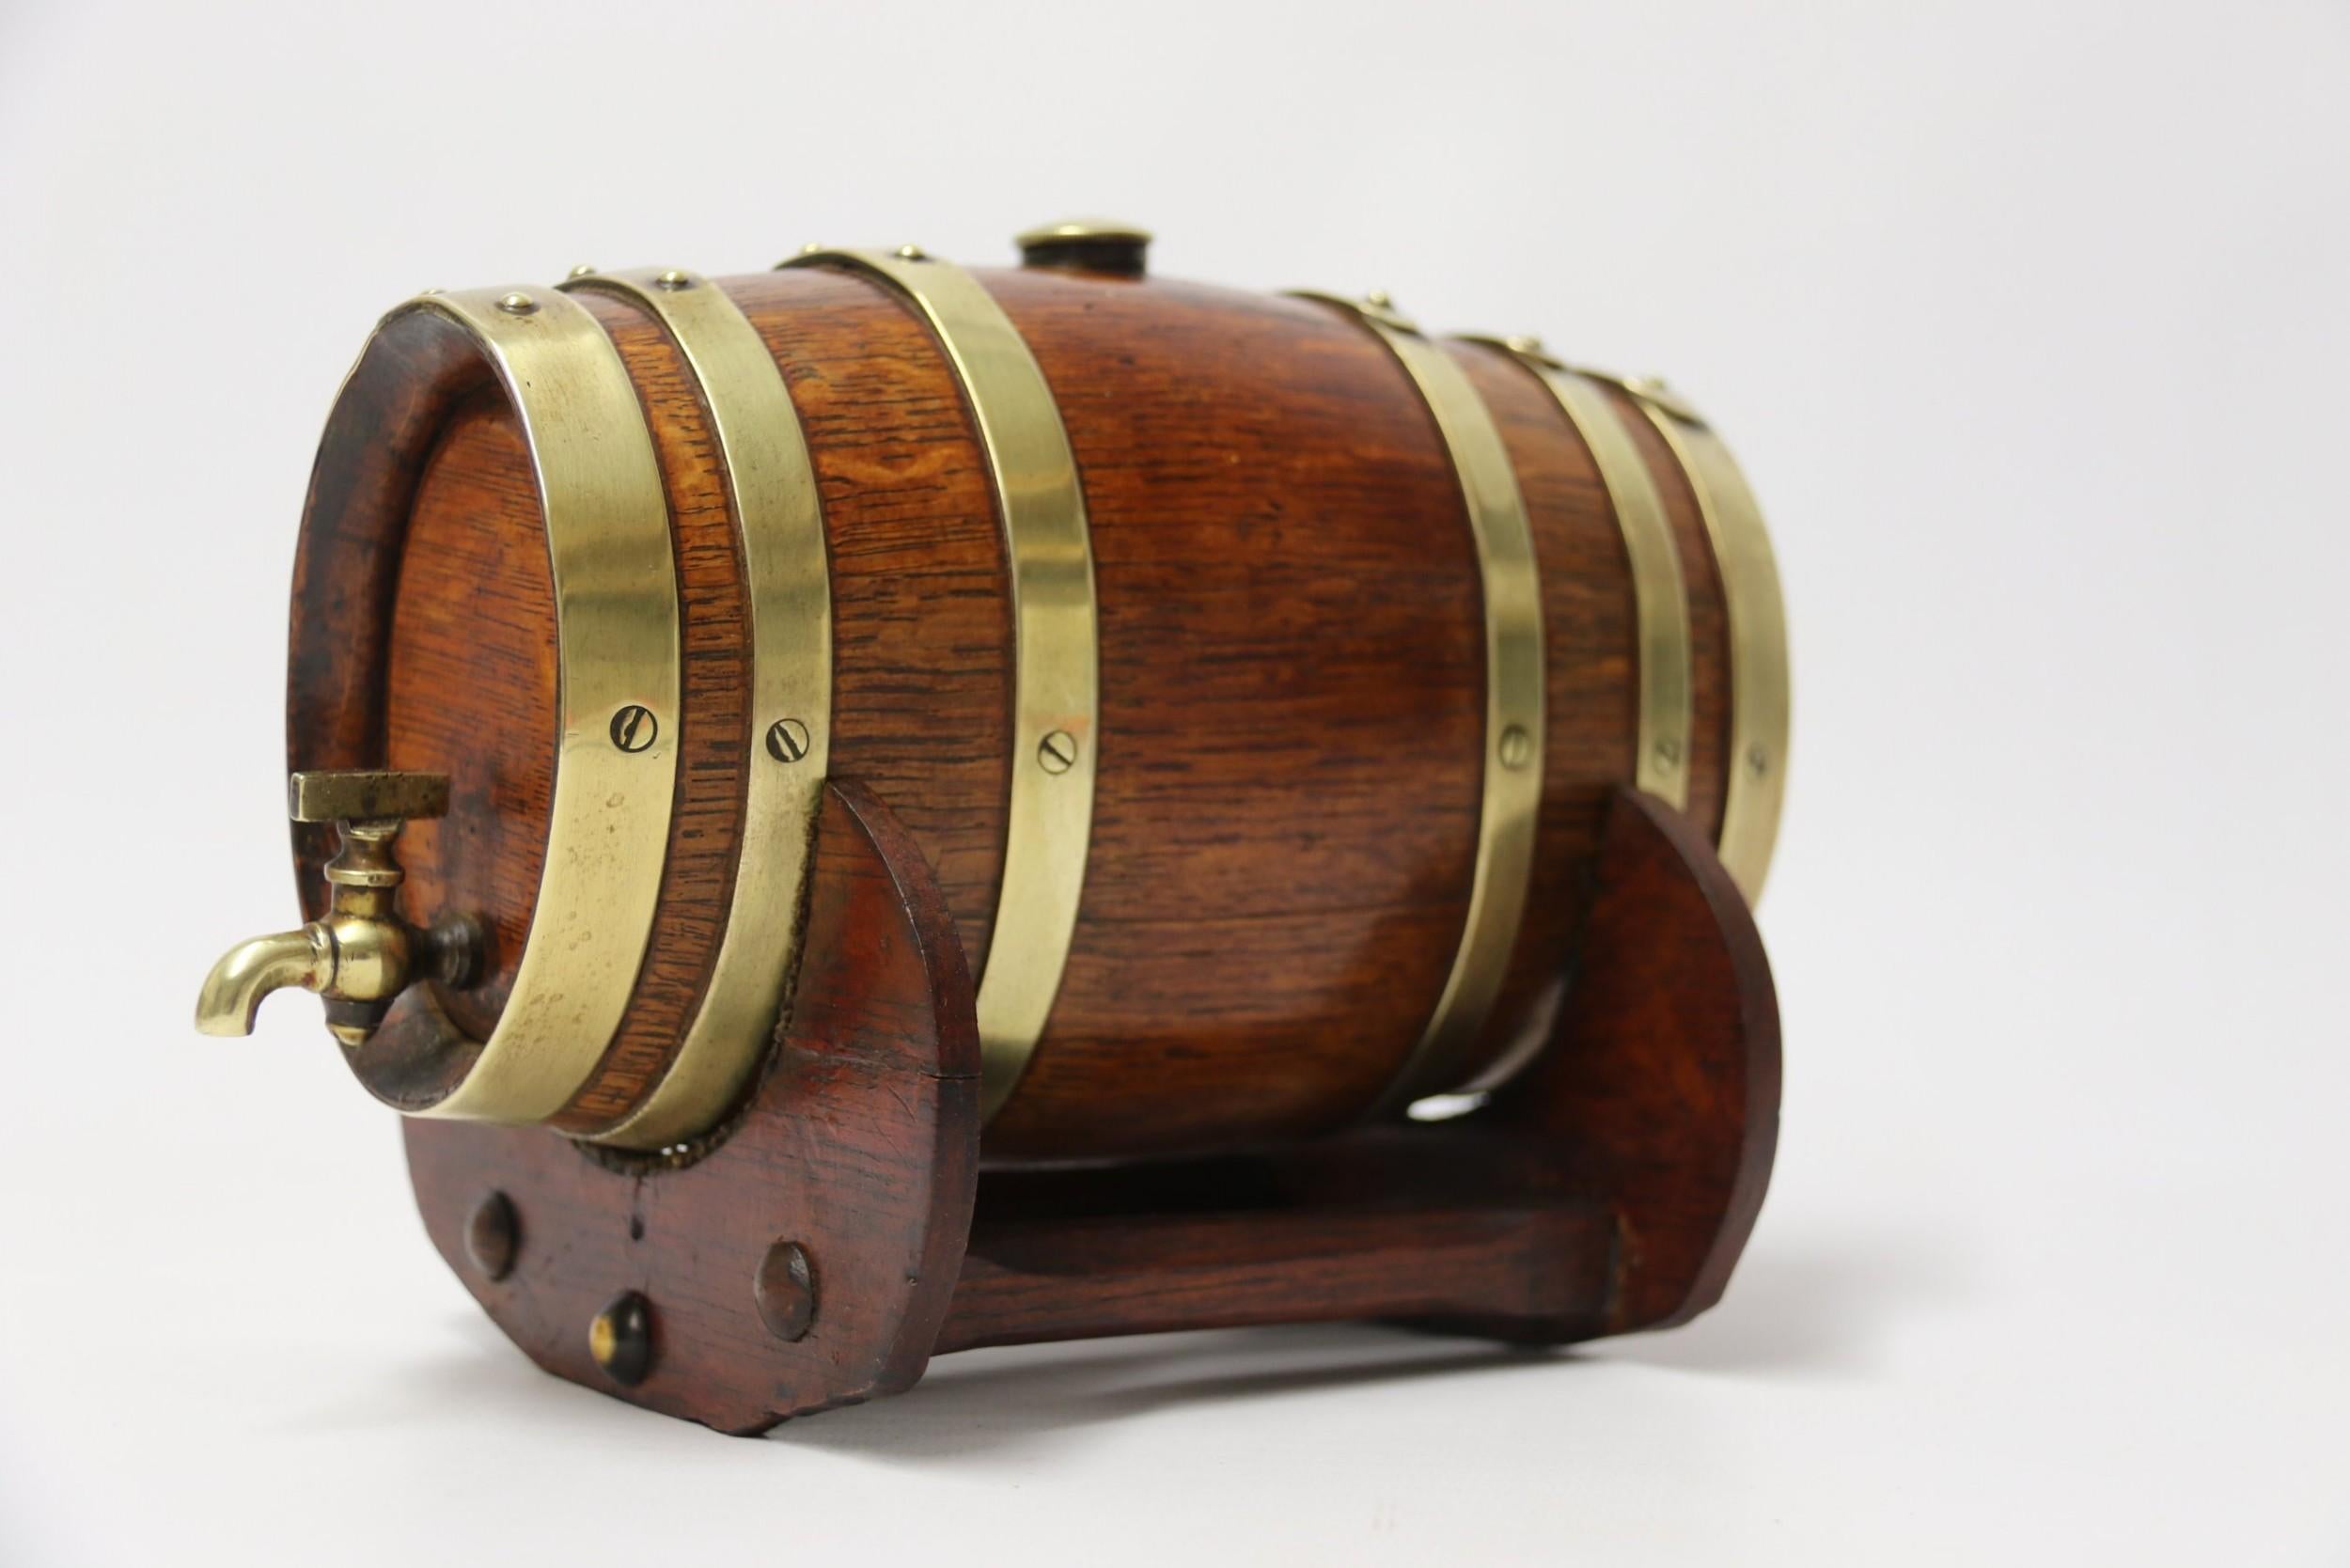 This superb handmade late Victorian oak and brass bound cask is made to an excellent standard.
It is of oval form with riveted and screwed brass bands which hold the segments together. At the top there is a threaded brass lid with an opening for